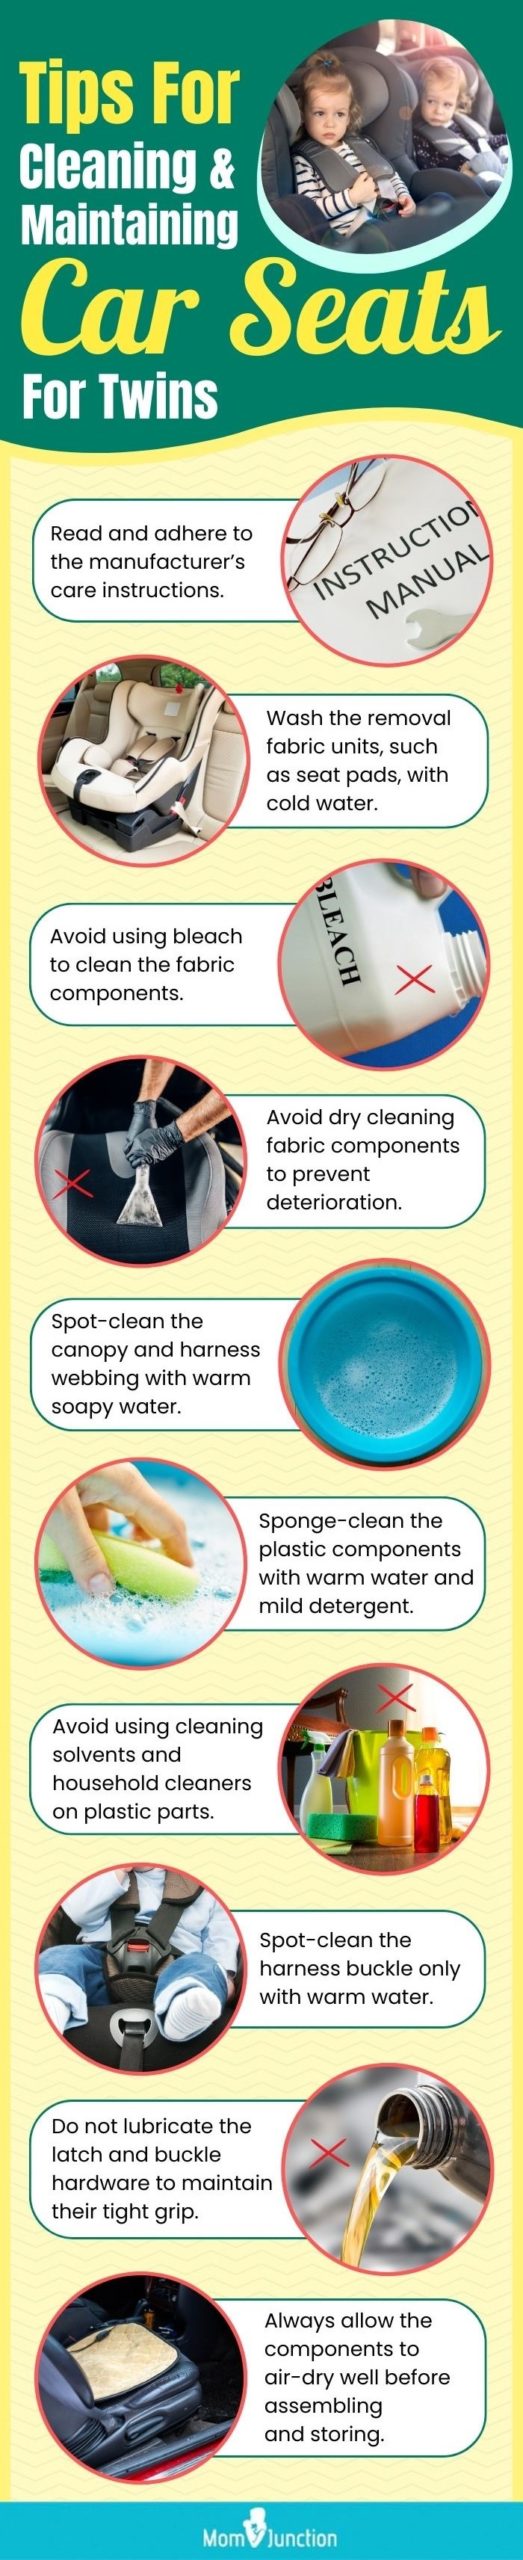 Tips For Cleaning And Maintaining Car Seats For Twins (infographic)